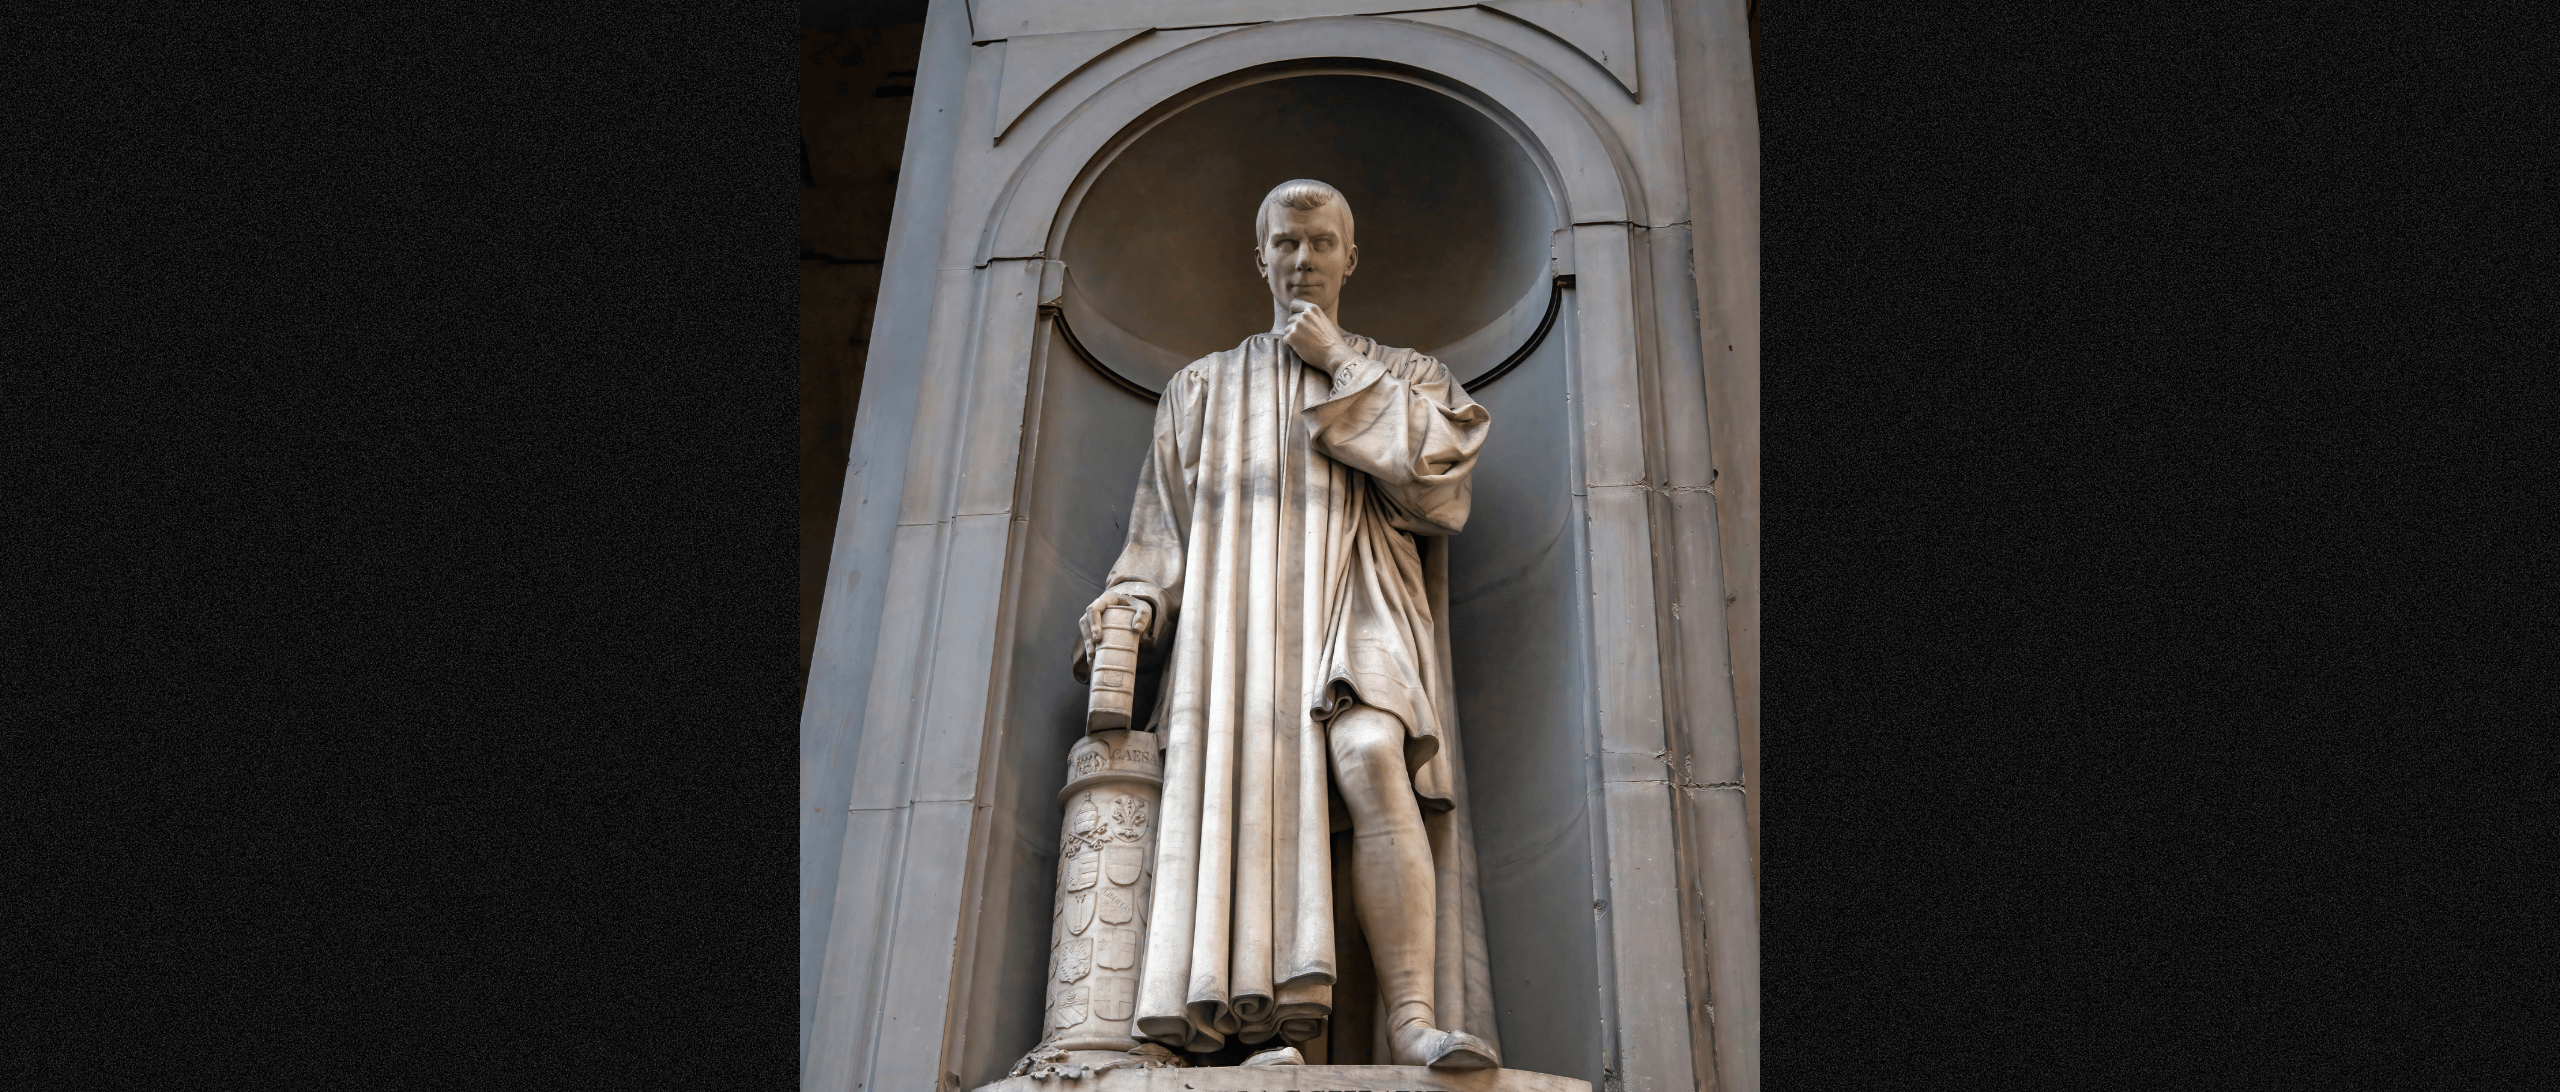 Machiavelli and the Modes of Terrorism